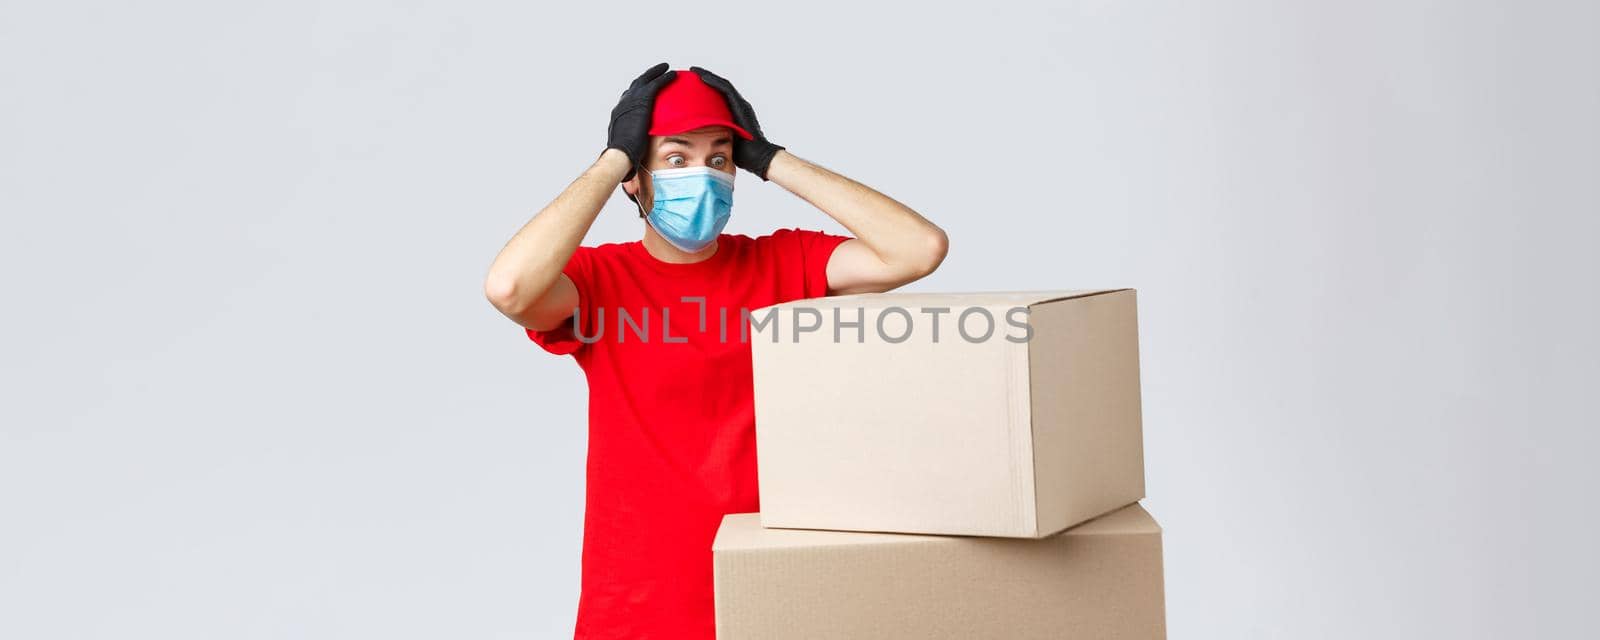 Packages and parcels delivery, covid-19 quarantine and transfer orders. Concerned and troubled courier in red uniform, face mask and gloves, grab head and gasping shocked staring at boxes.